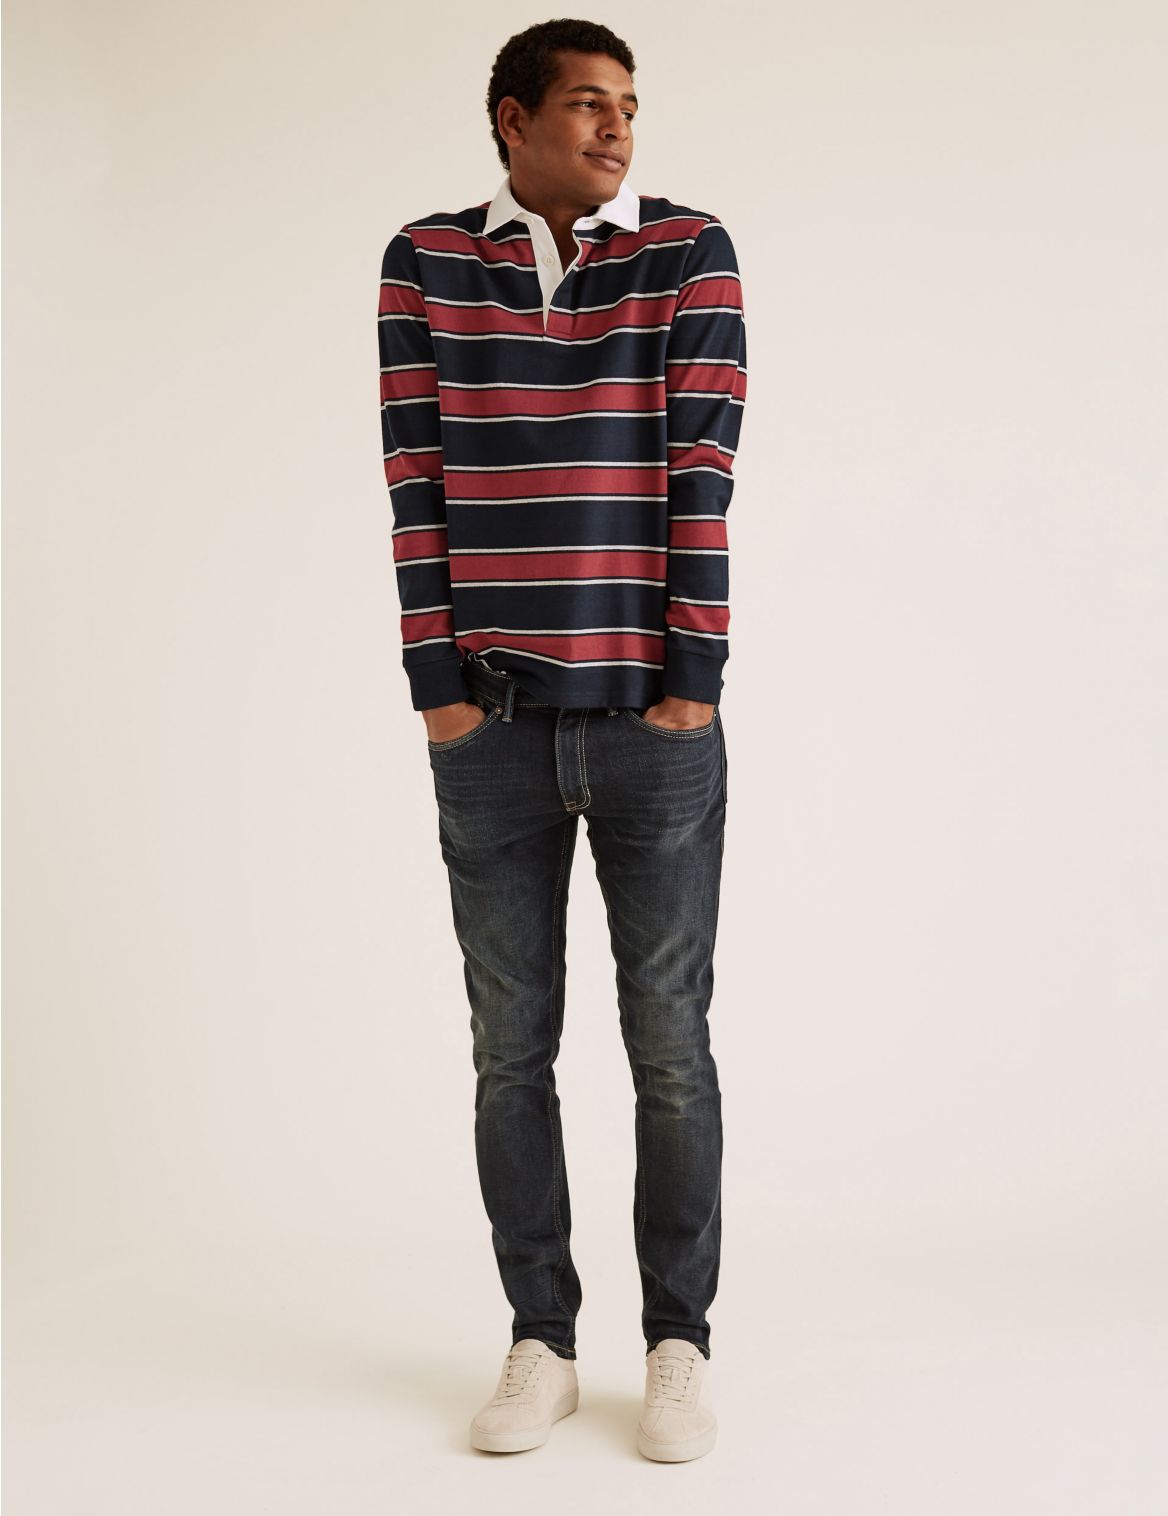 Cotton Striped Long Sleeve Rugby Top navy